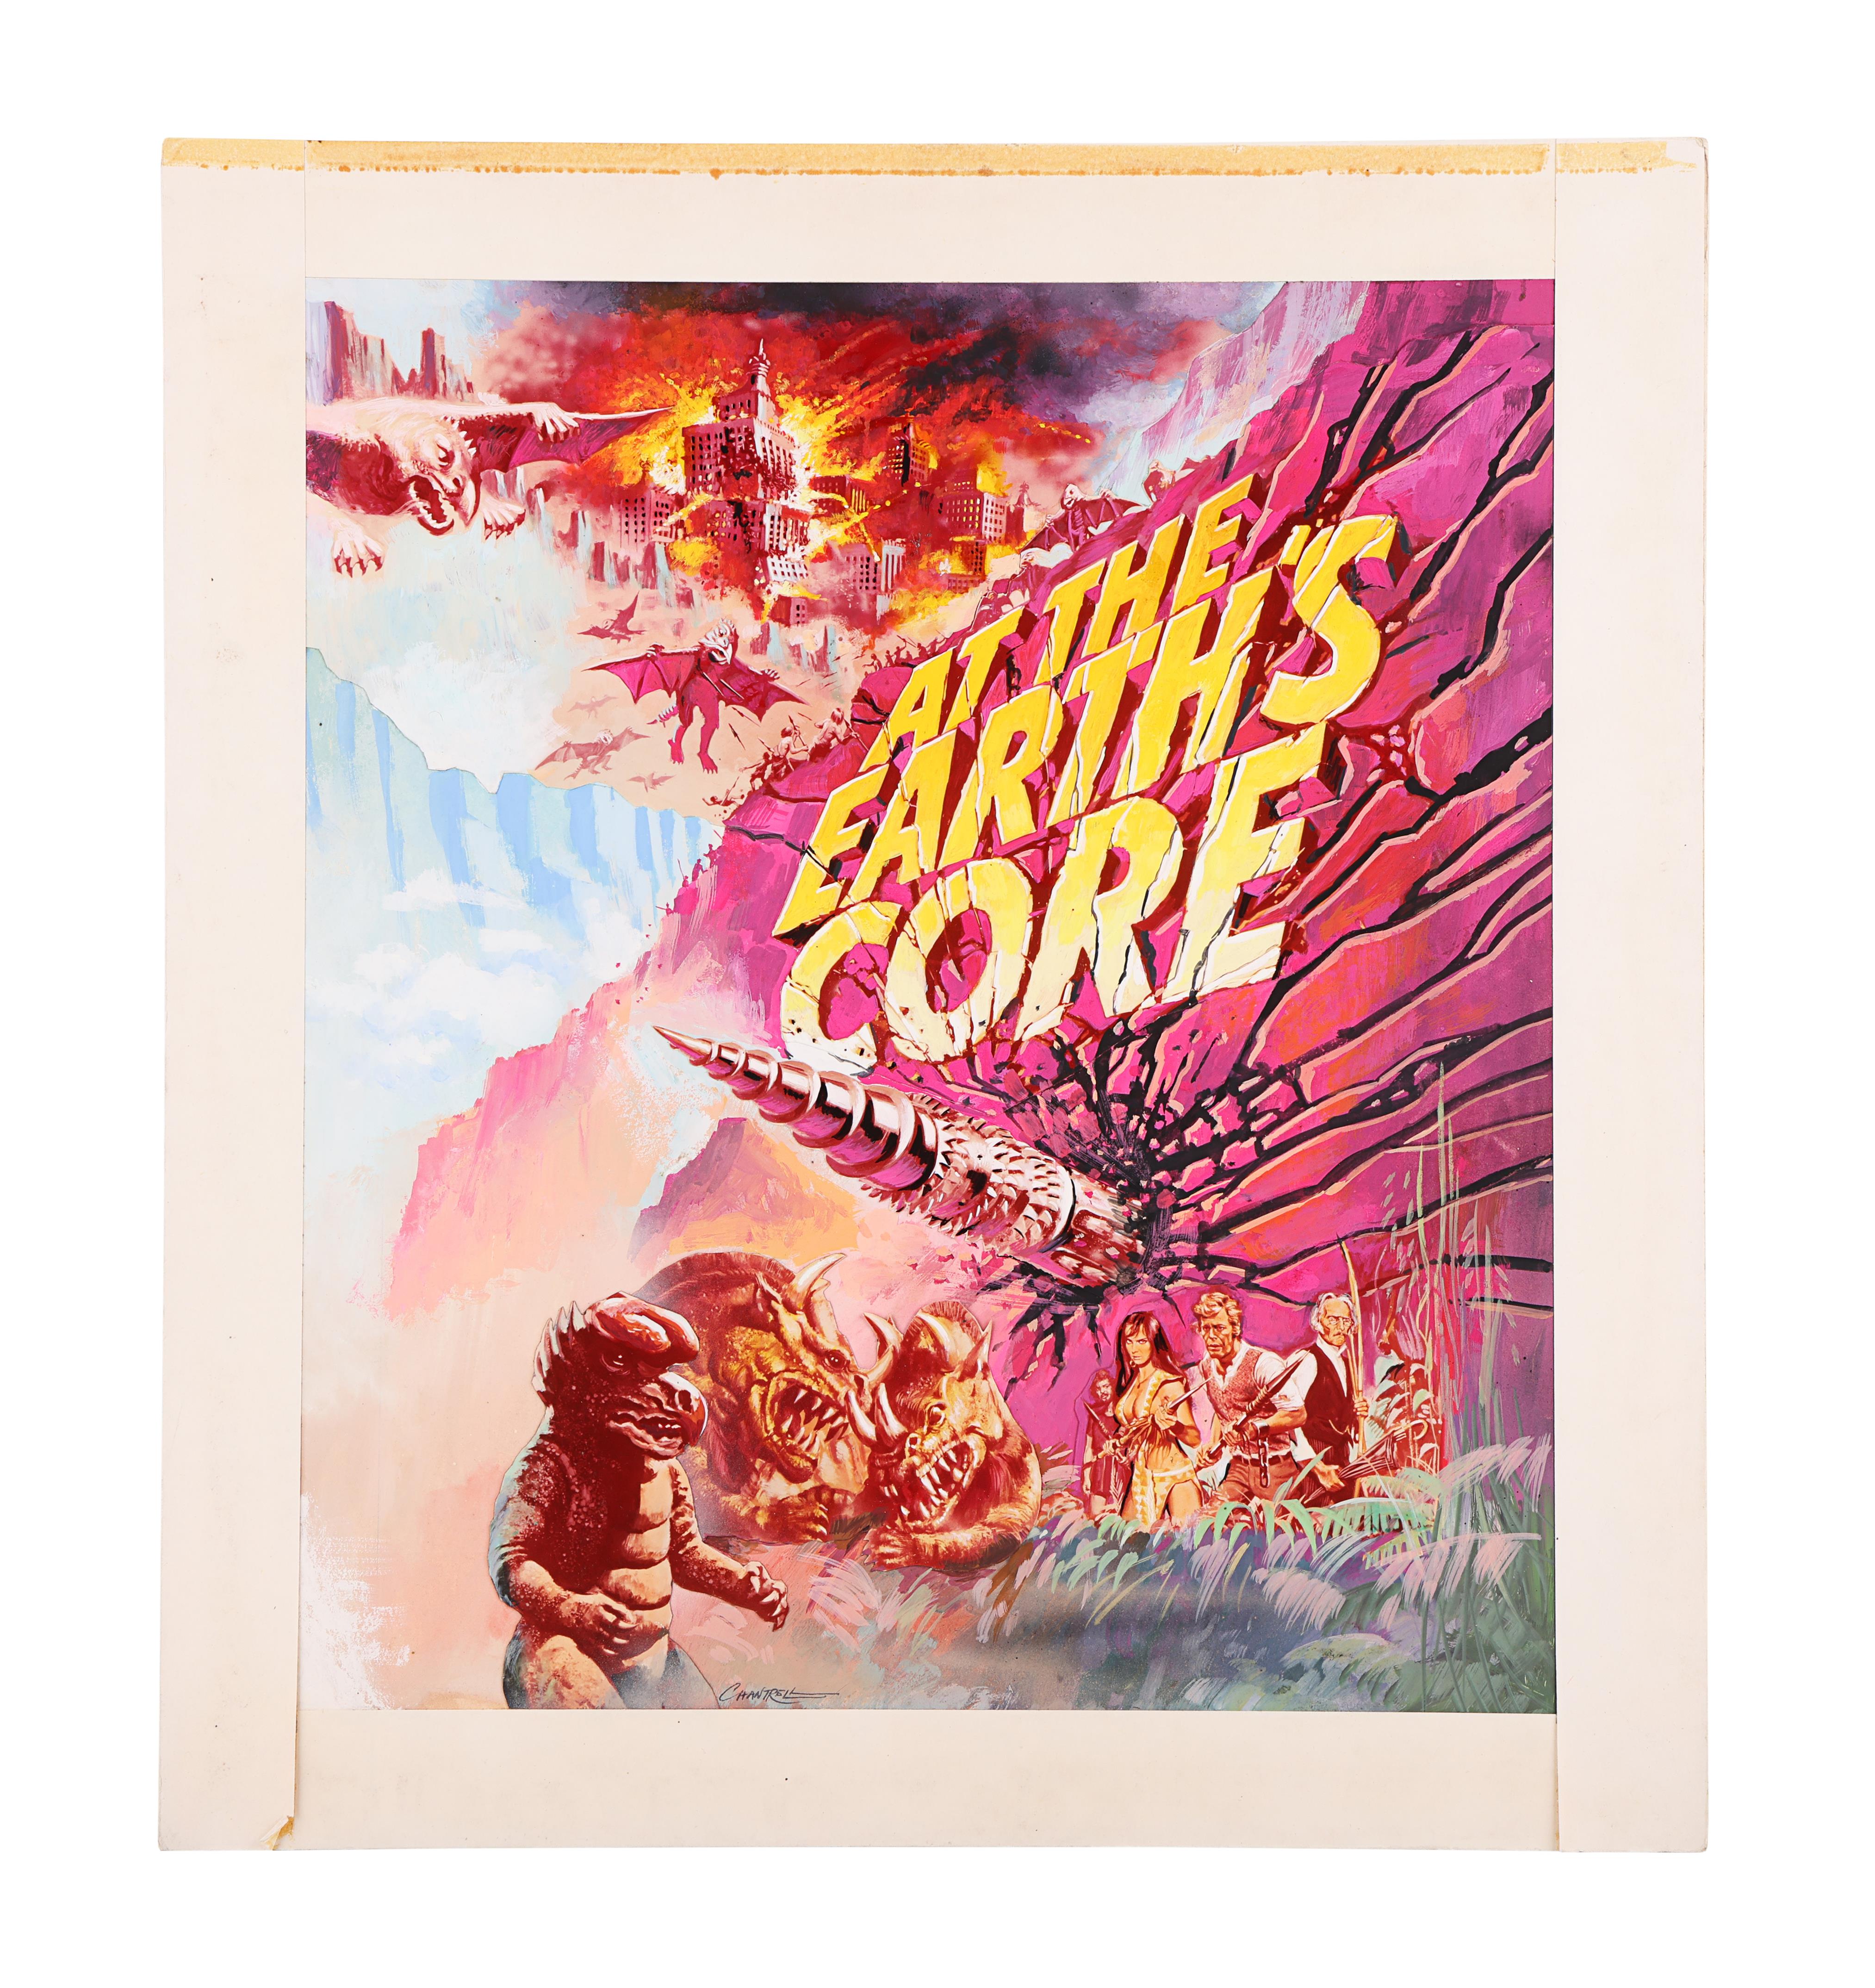 AT THE EARTH'S CORE (1976) - Original Poster Composition Artwork, 1976